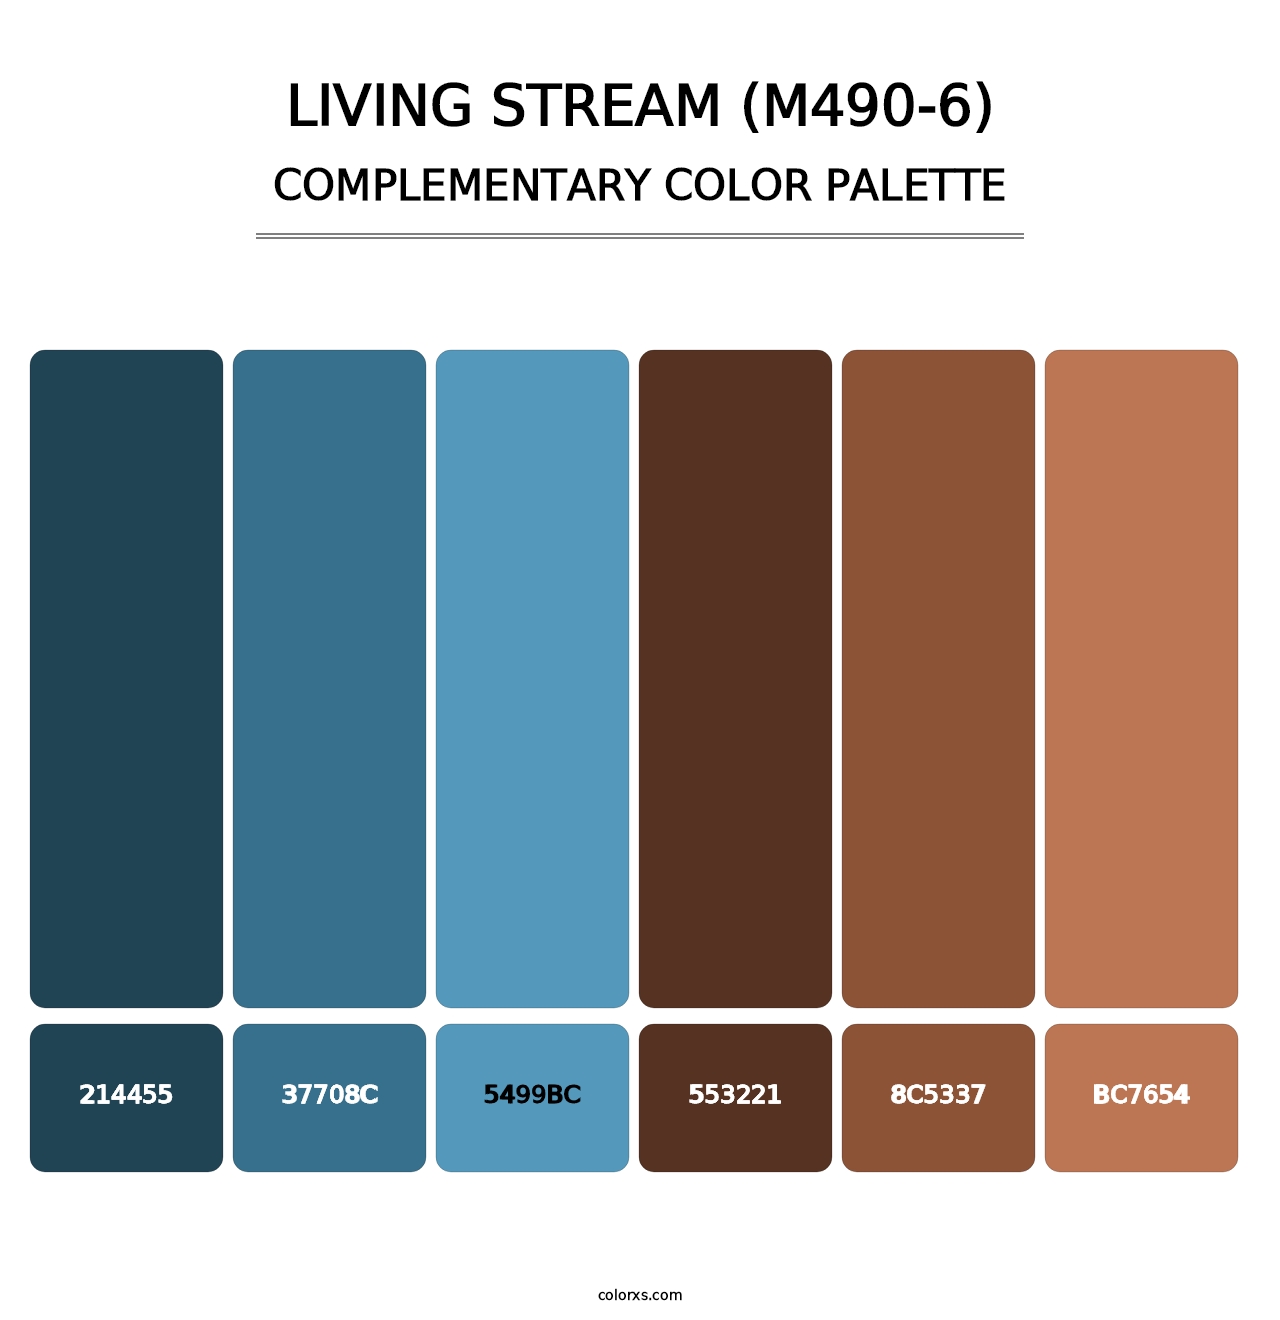 Living Stream (M490-6) - Complementary Color Palette